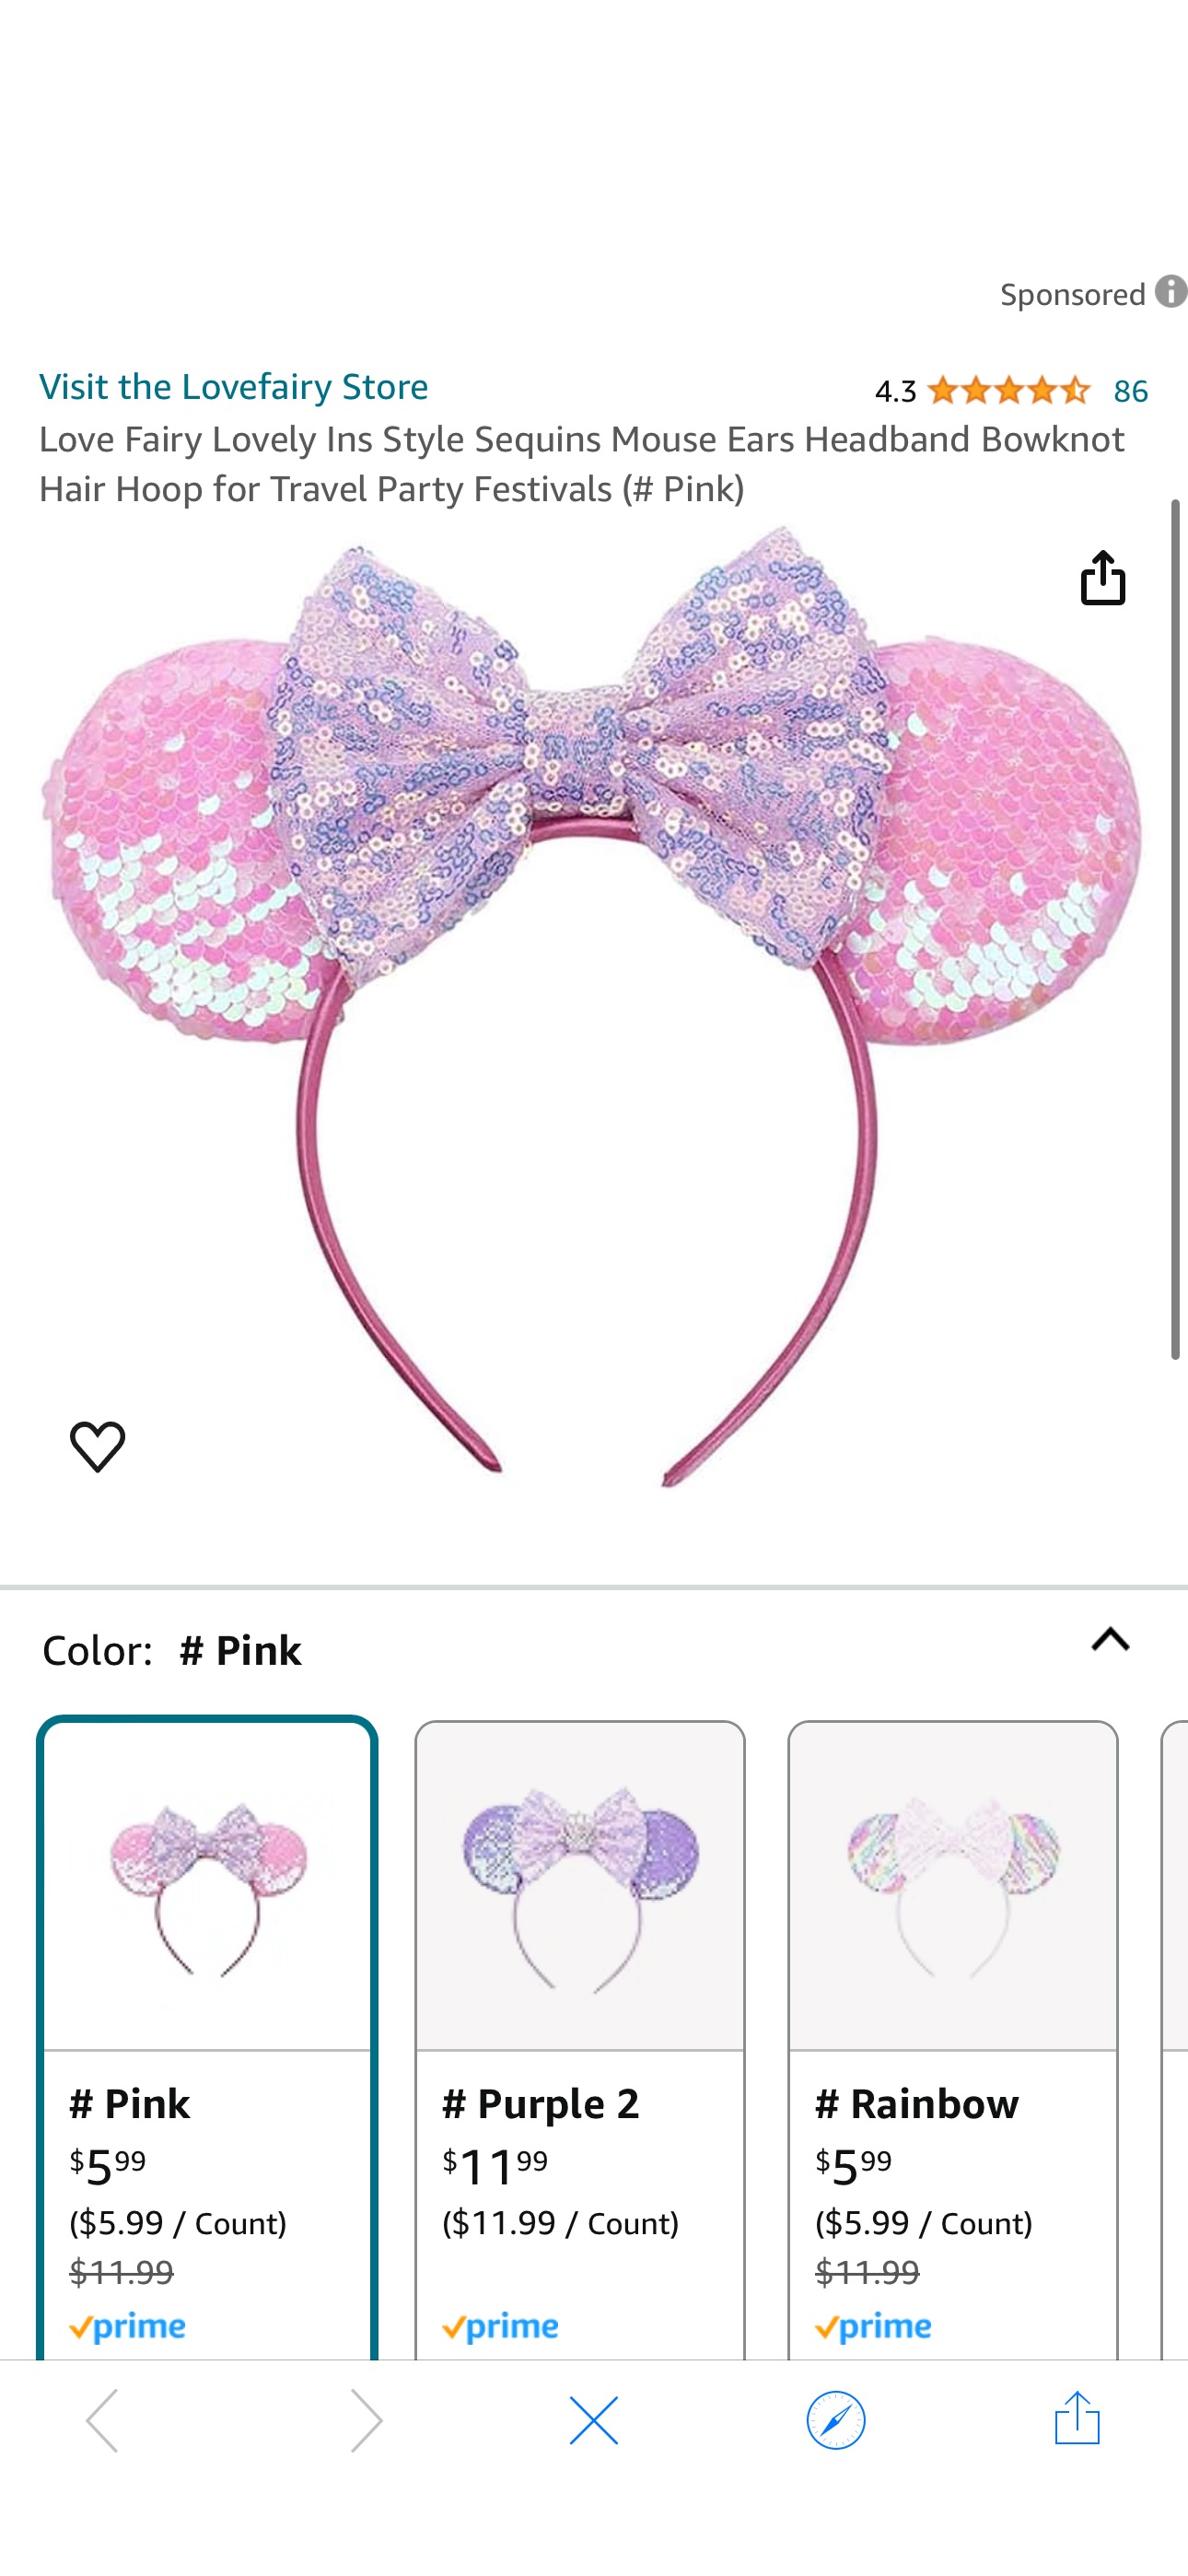 Amazon.com: Love Fairy Lovely Ins Style Sequins Mouse Ears Headband Bowknot Hair Hoop for Travel Party Festivals (# Pink) : Clothing, Shoes & Jewelry